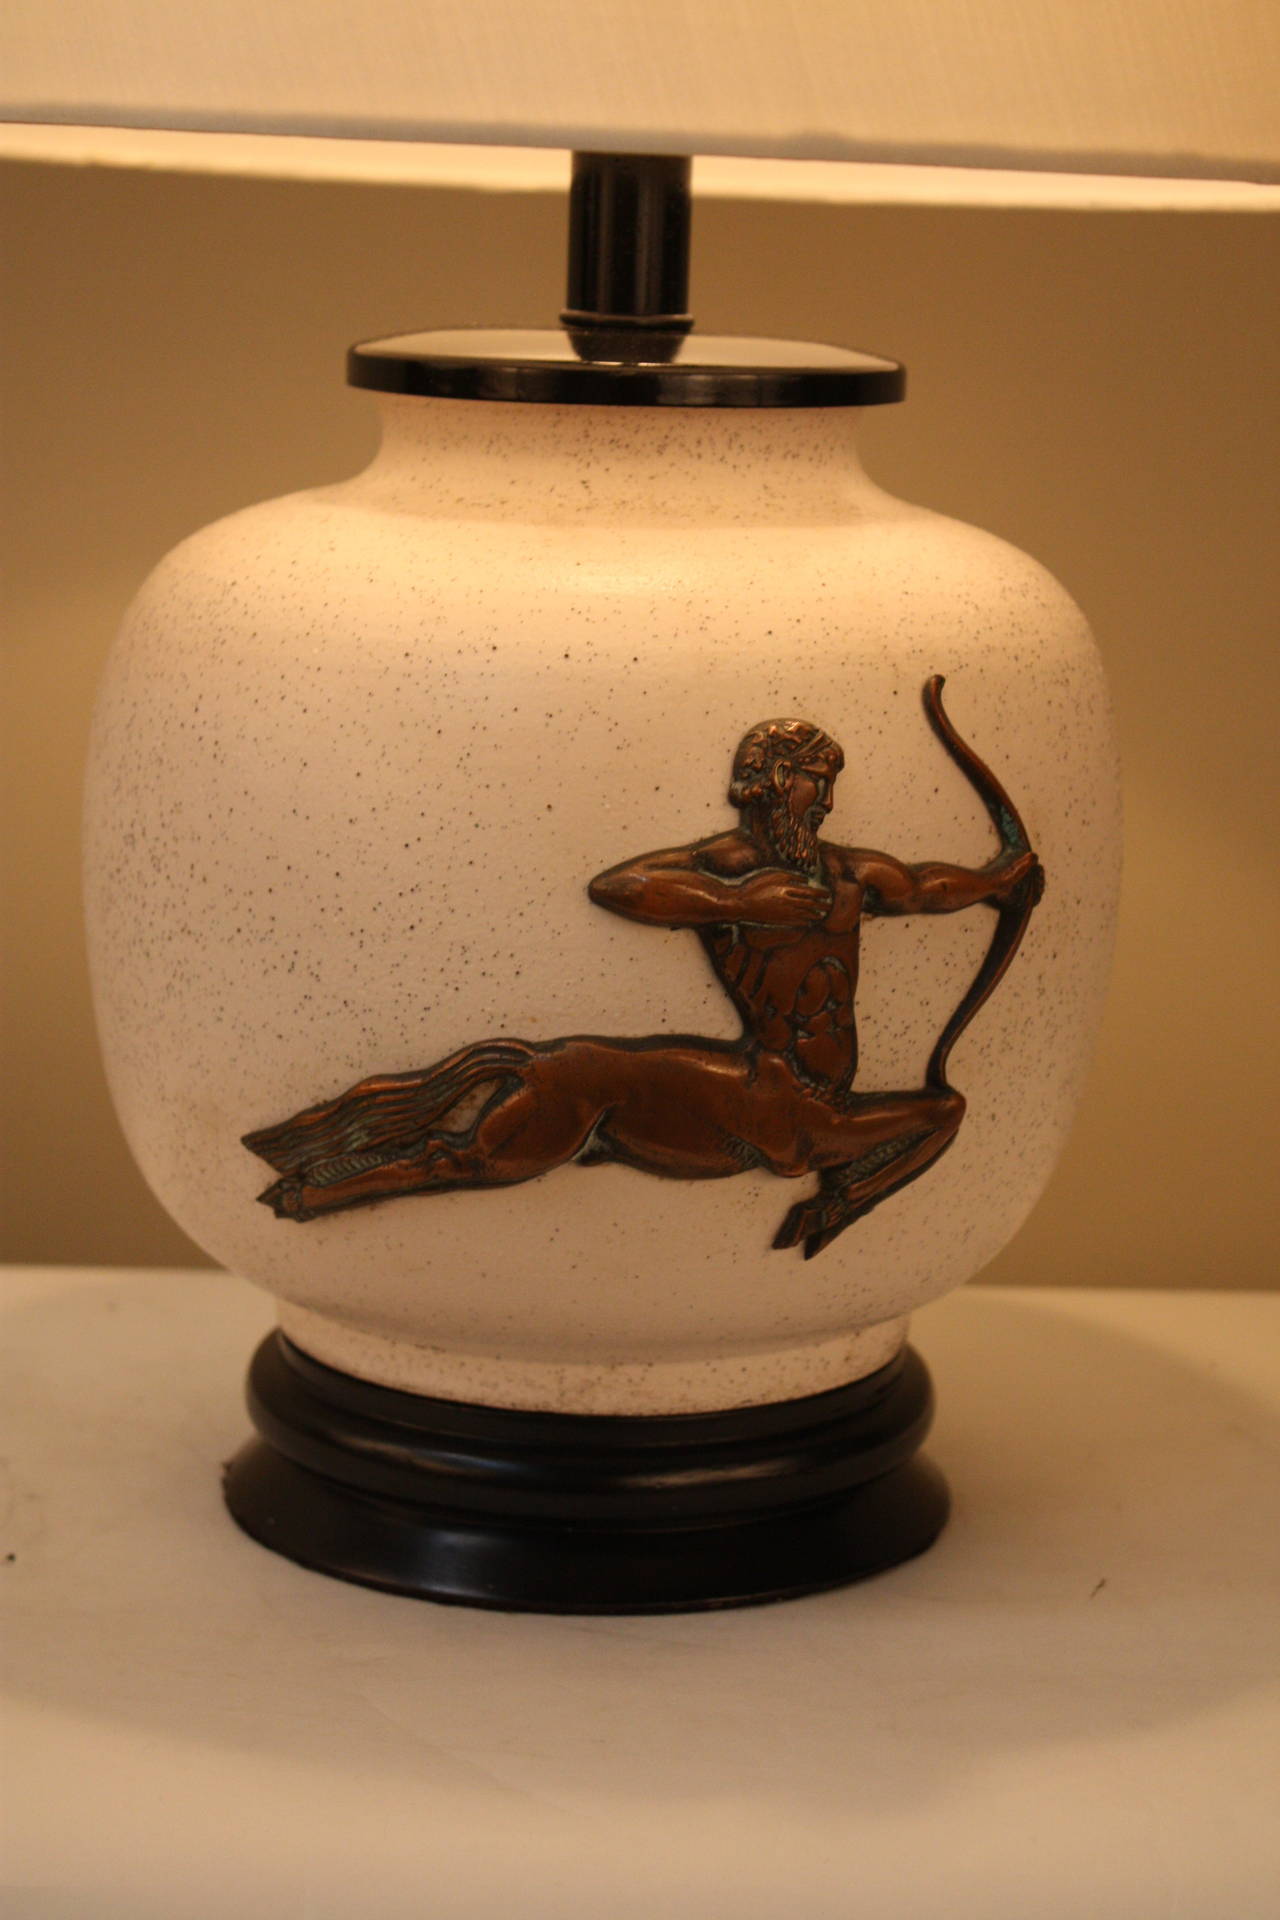 French Mid-Century ceramic lamp with bronze centaur in bedded on the lamp by famous Parisian ceramist Pol Chambost.